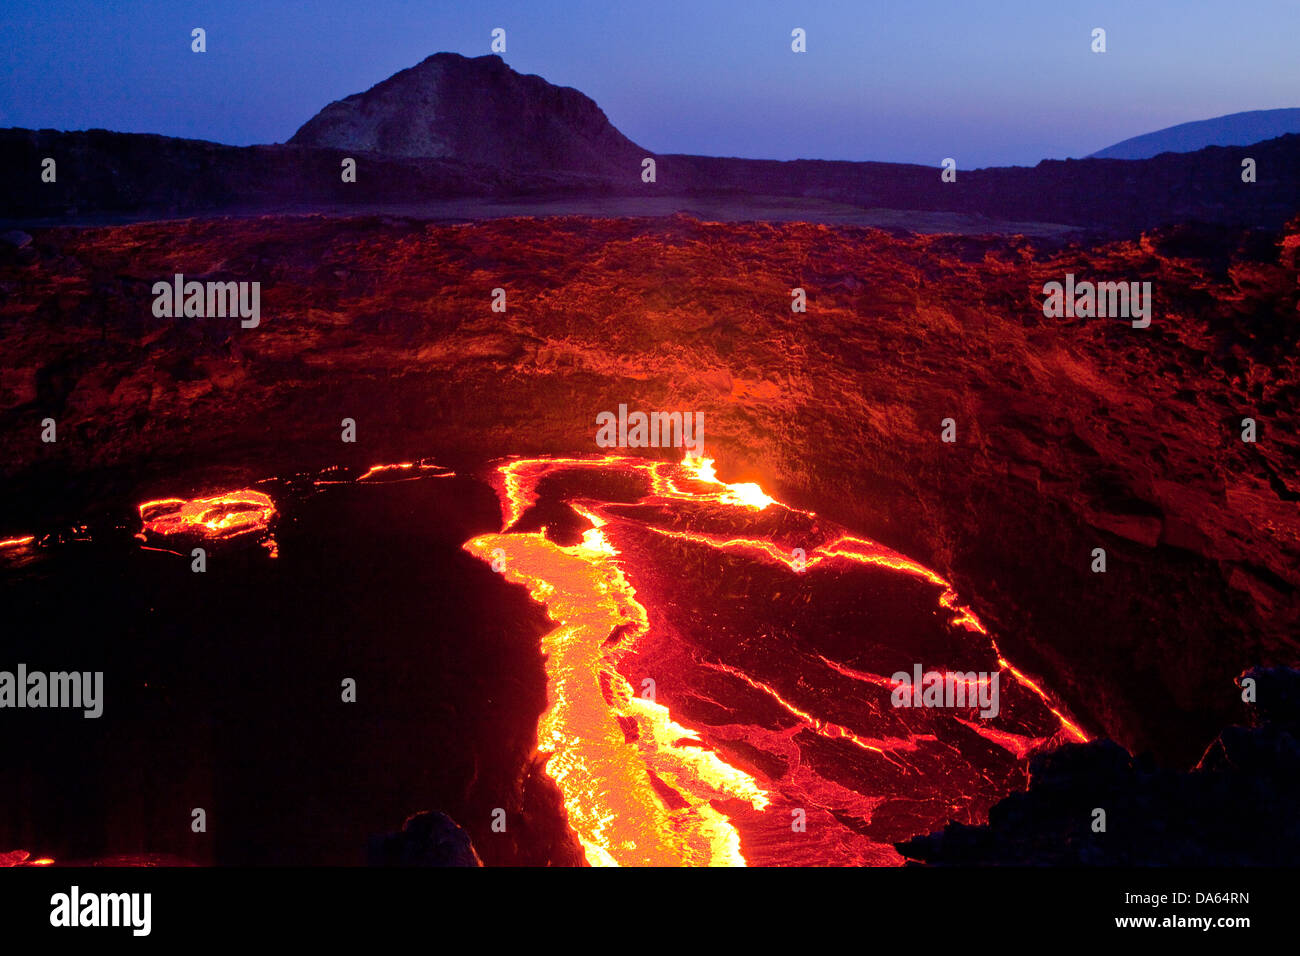 glow, smoulder, lava, eruption, Ertale, volcano, volcanical, Africa, mountain, mountains, fire, nature, Ethiopia, Stock Photo